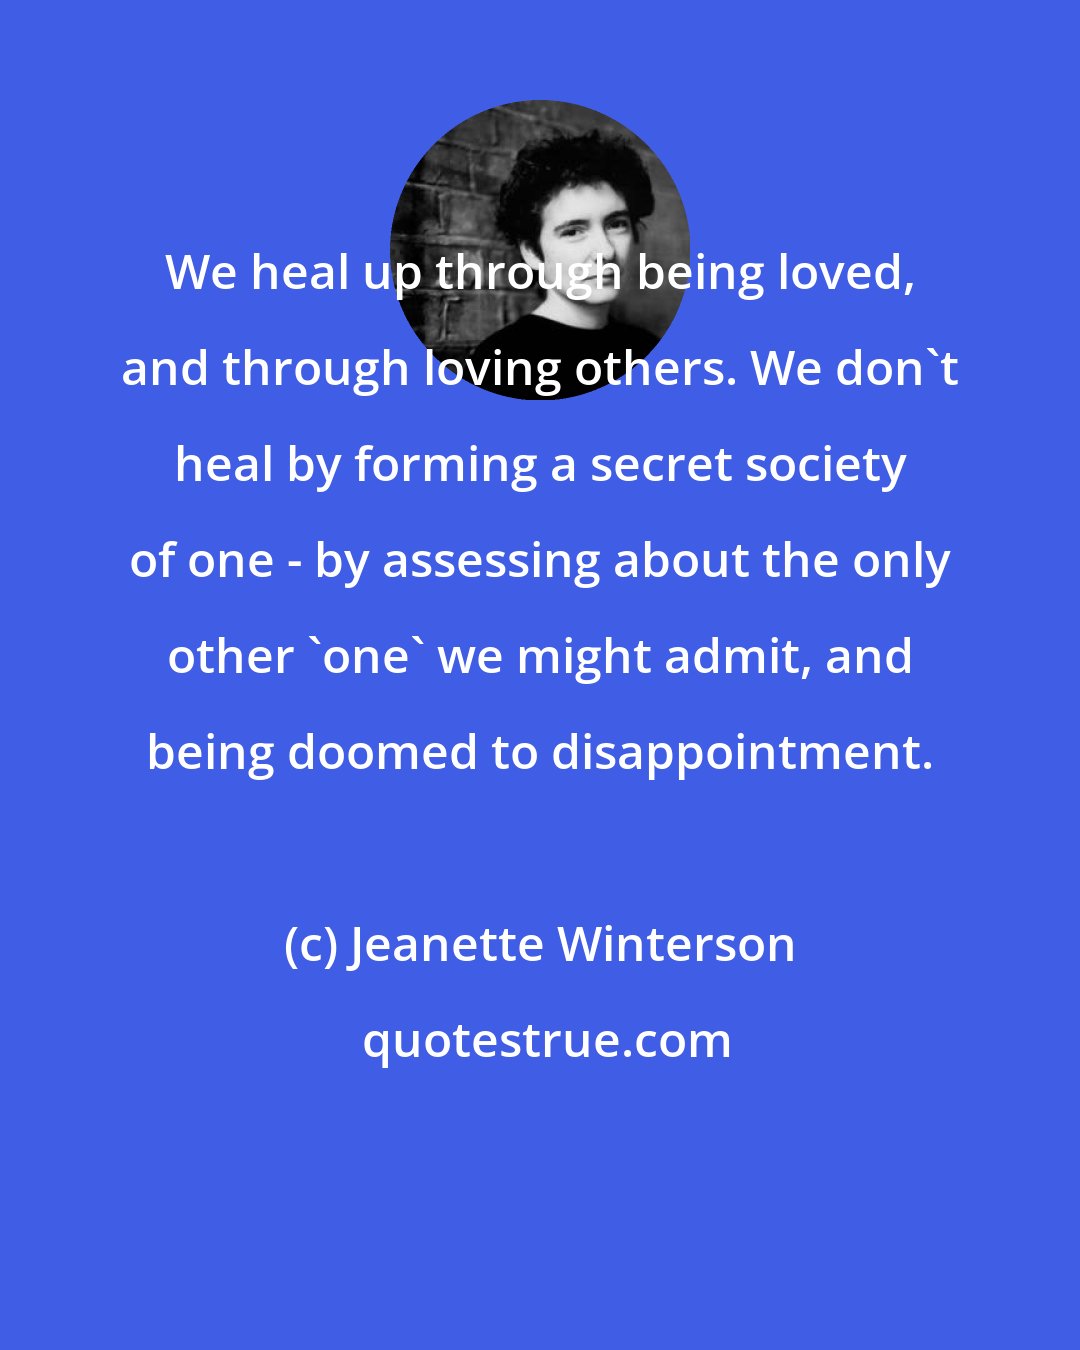 Jeanette Winterson: We heal up through being loved, and through loving others. We don't heal by forming a secret society of one - by assessing about the only other 'one' we might admit, and being doomed to disappointment.